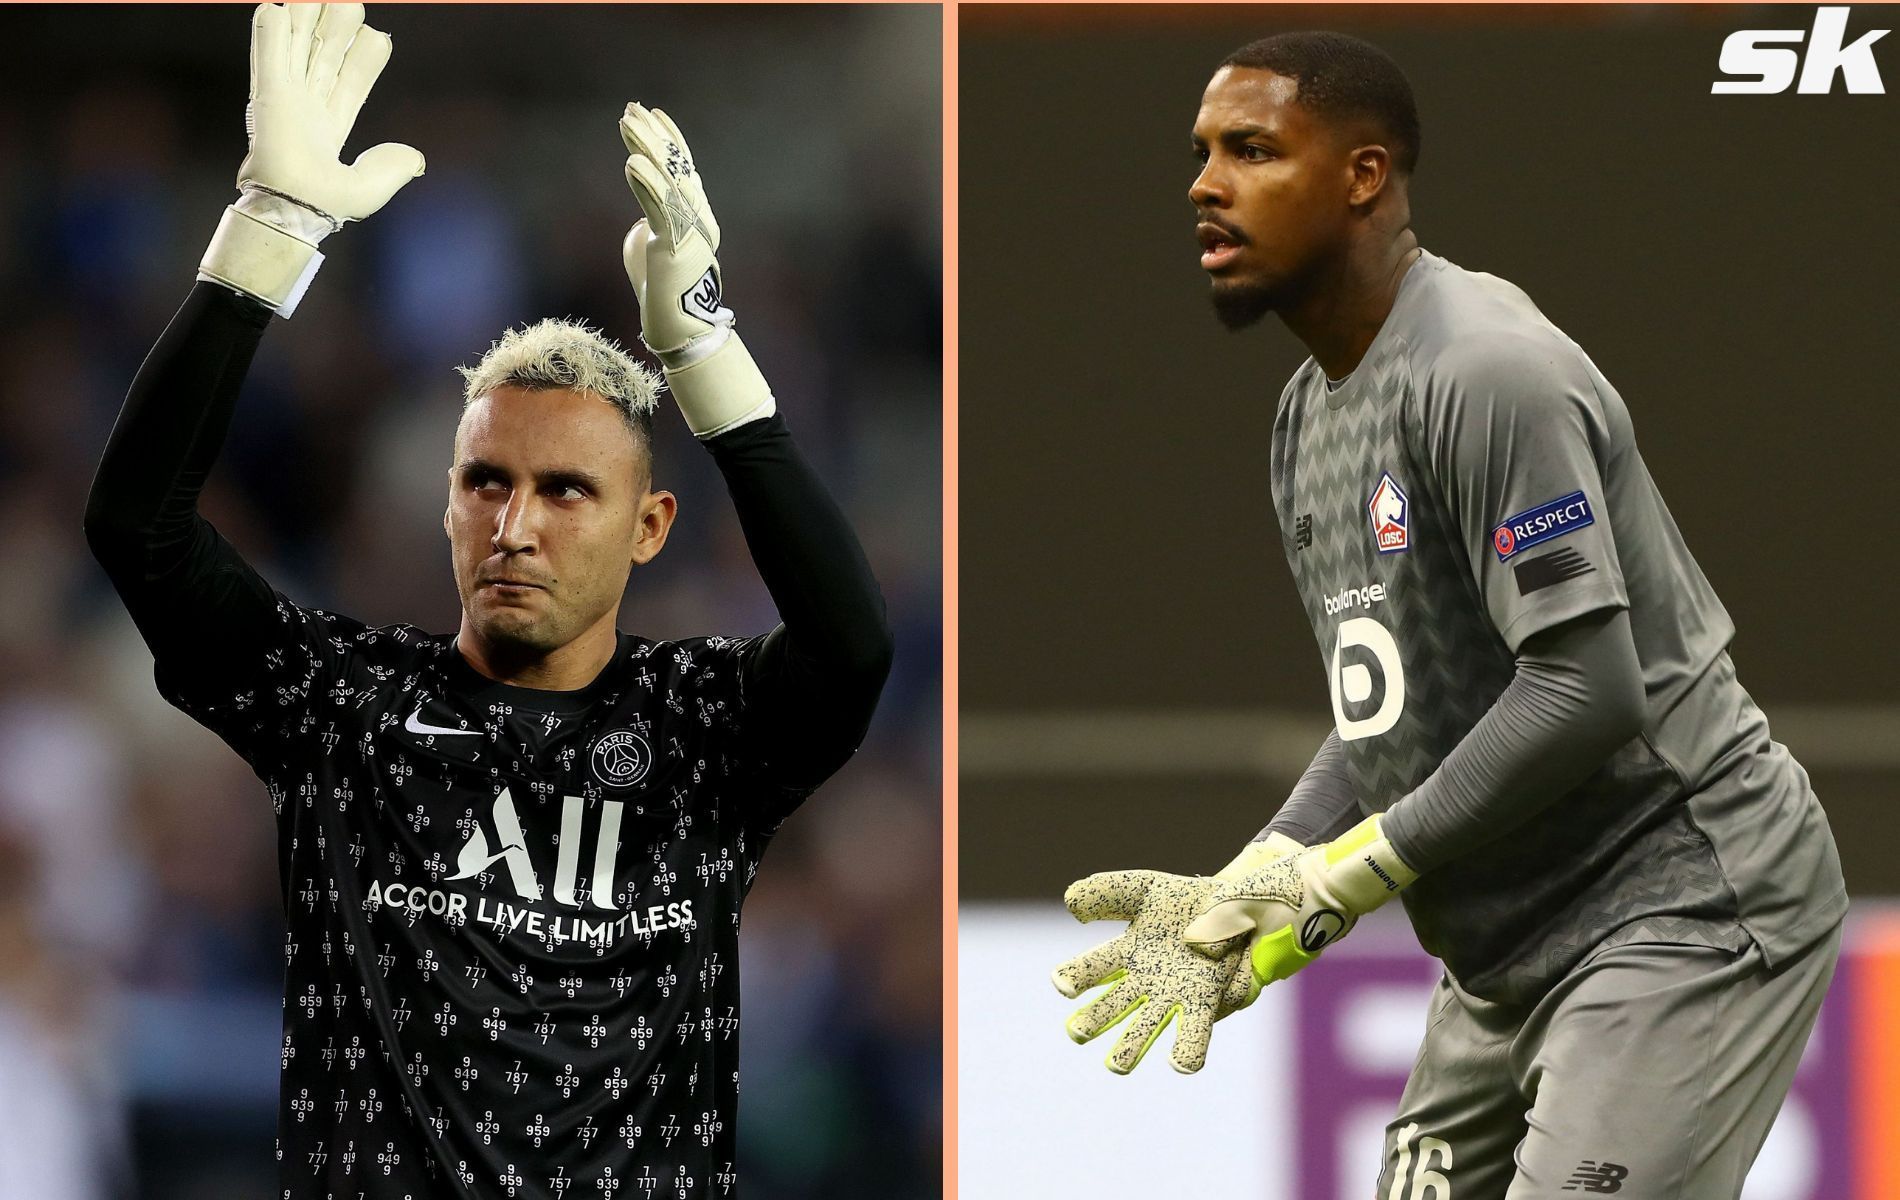 Ligue 1 goalkeepers have given some quality performances in 2021